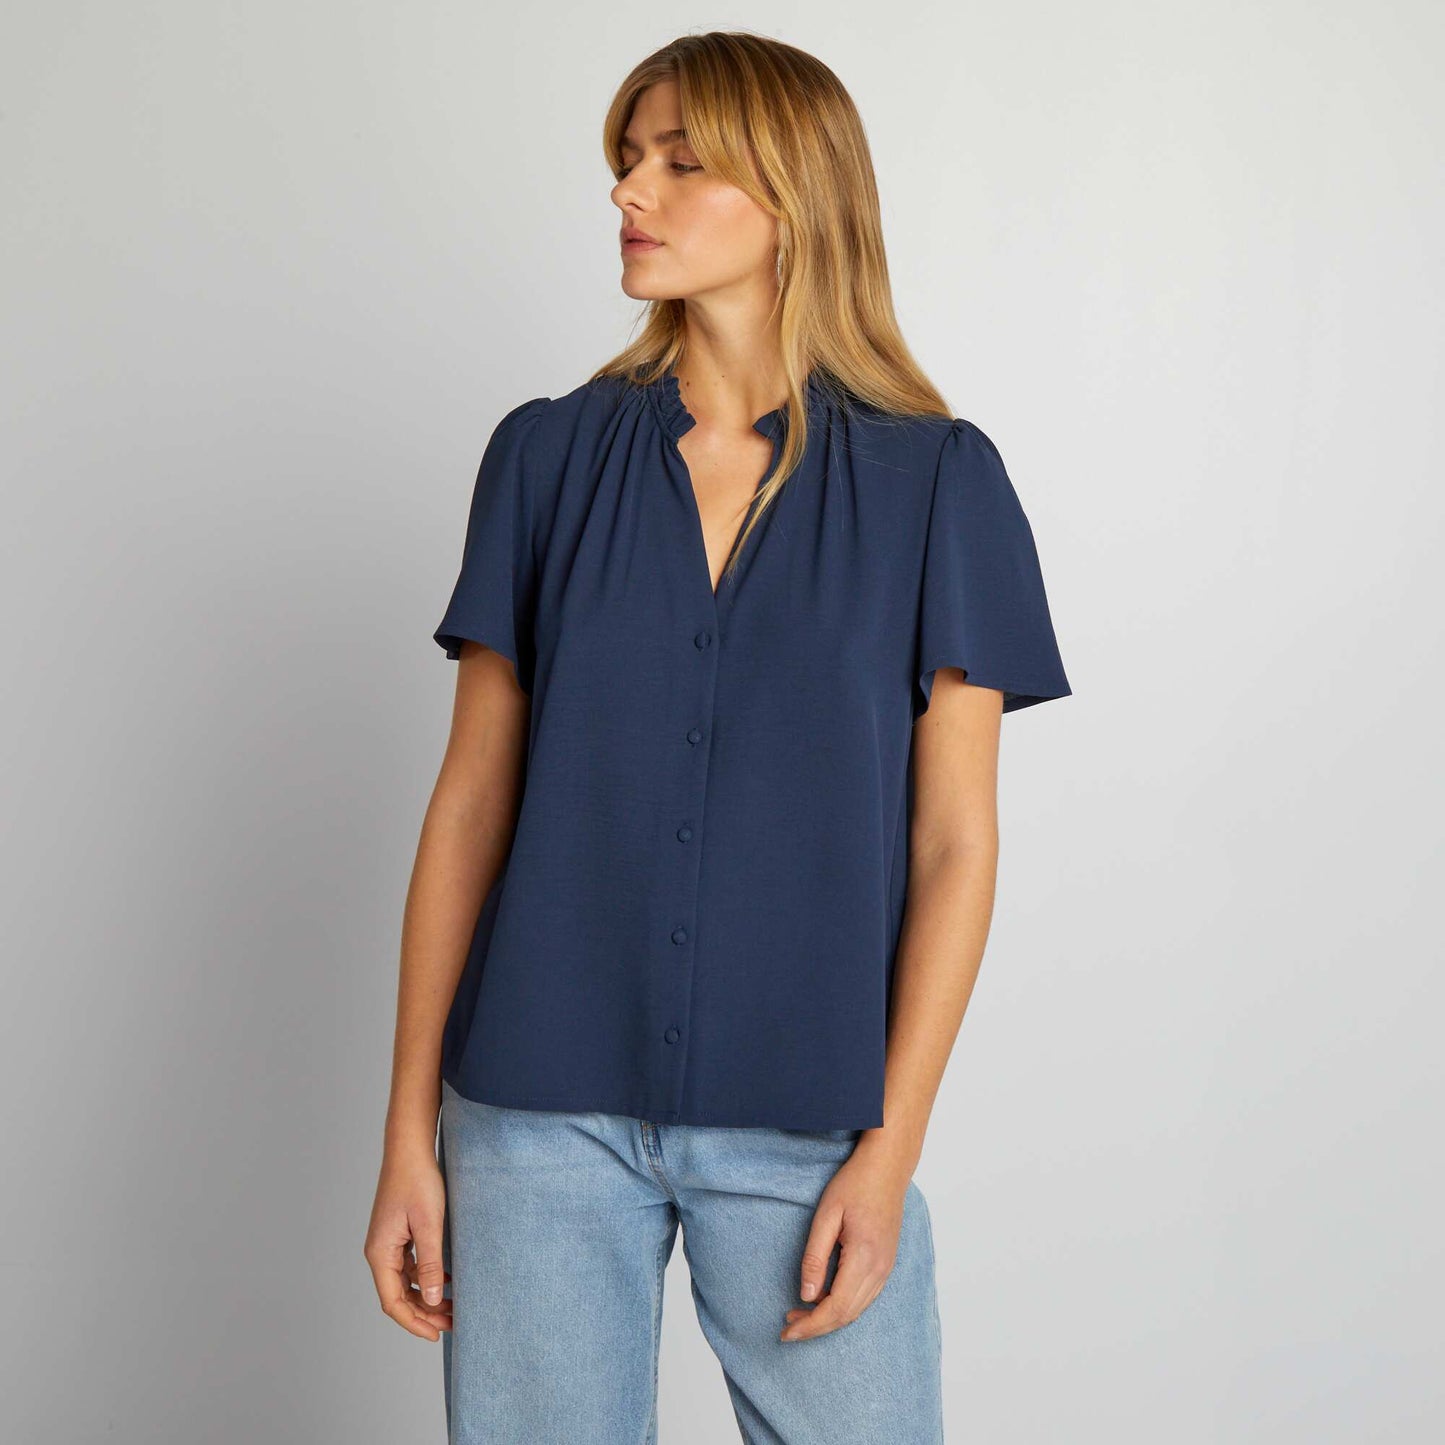 Flowing blouse navy